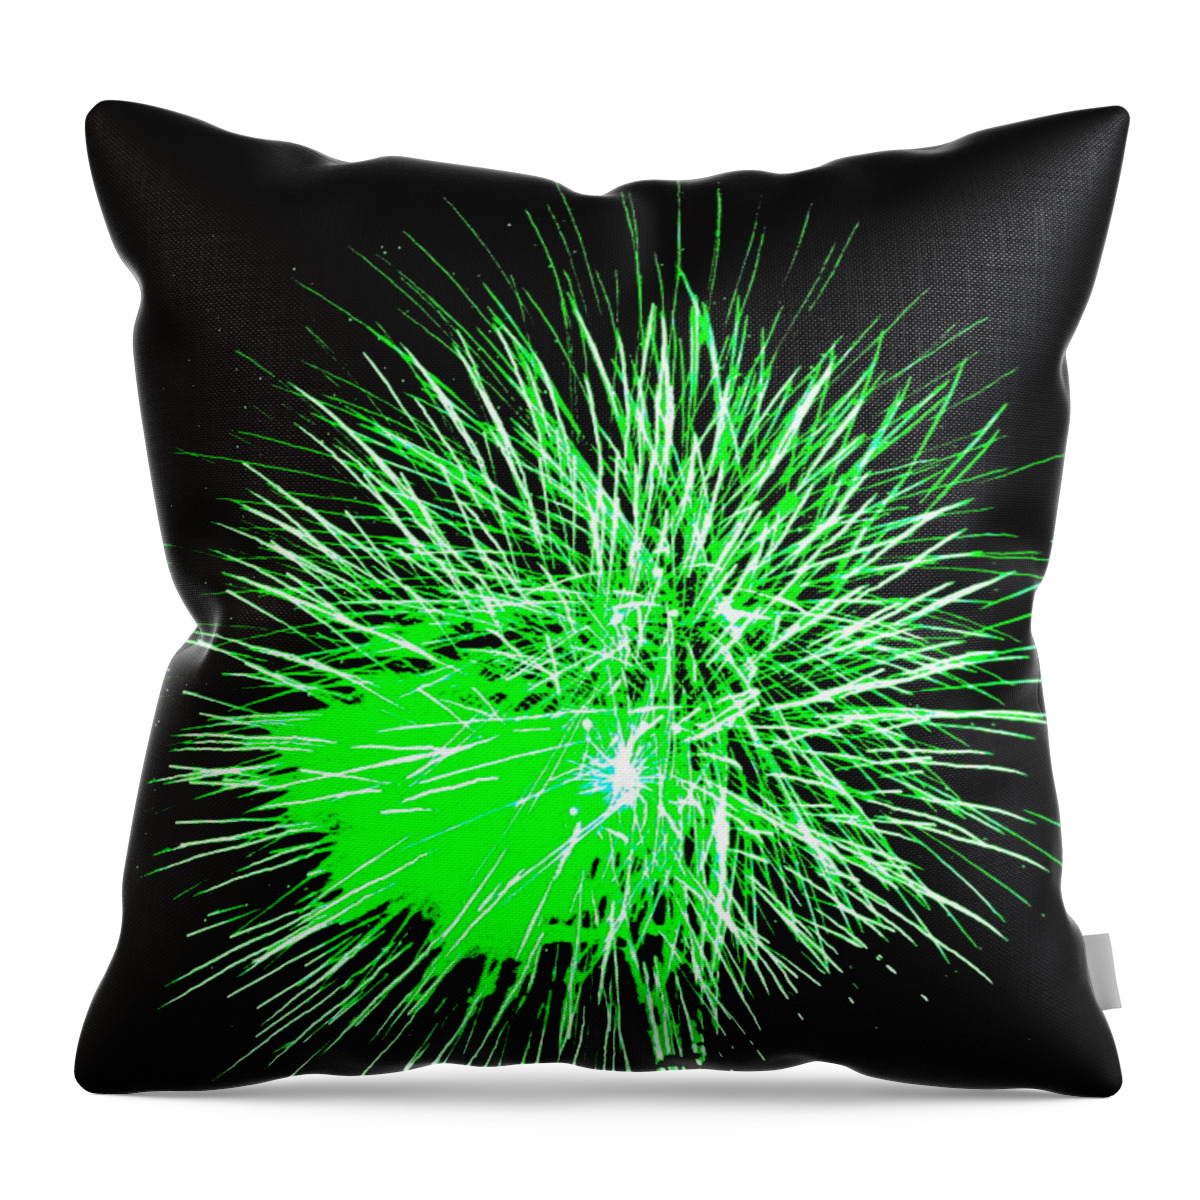 Fireworks Throw Pillow featuring the photograph Fireworks in Green by Michael Porchik